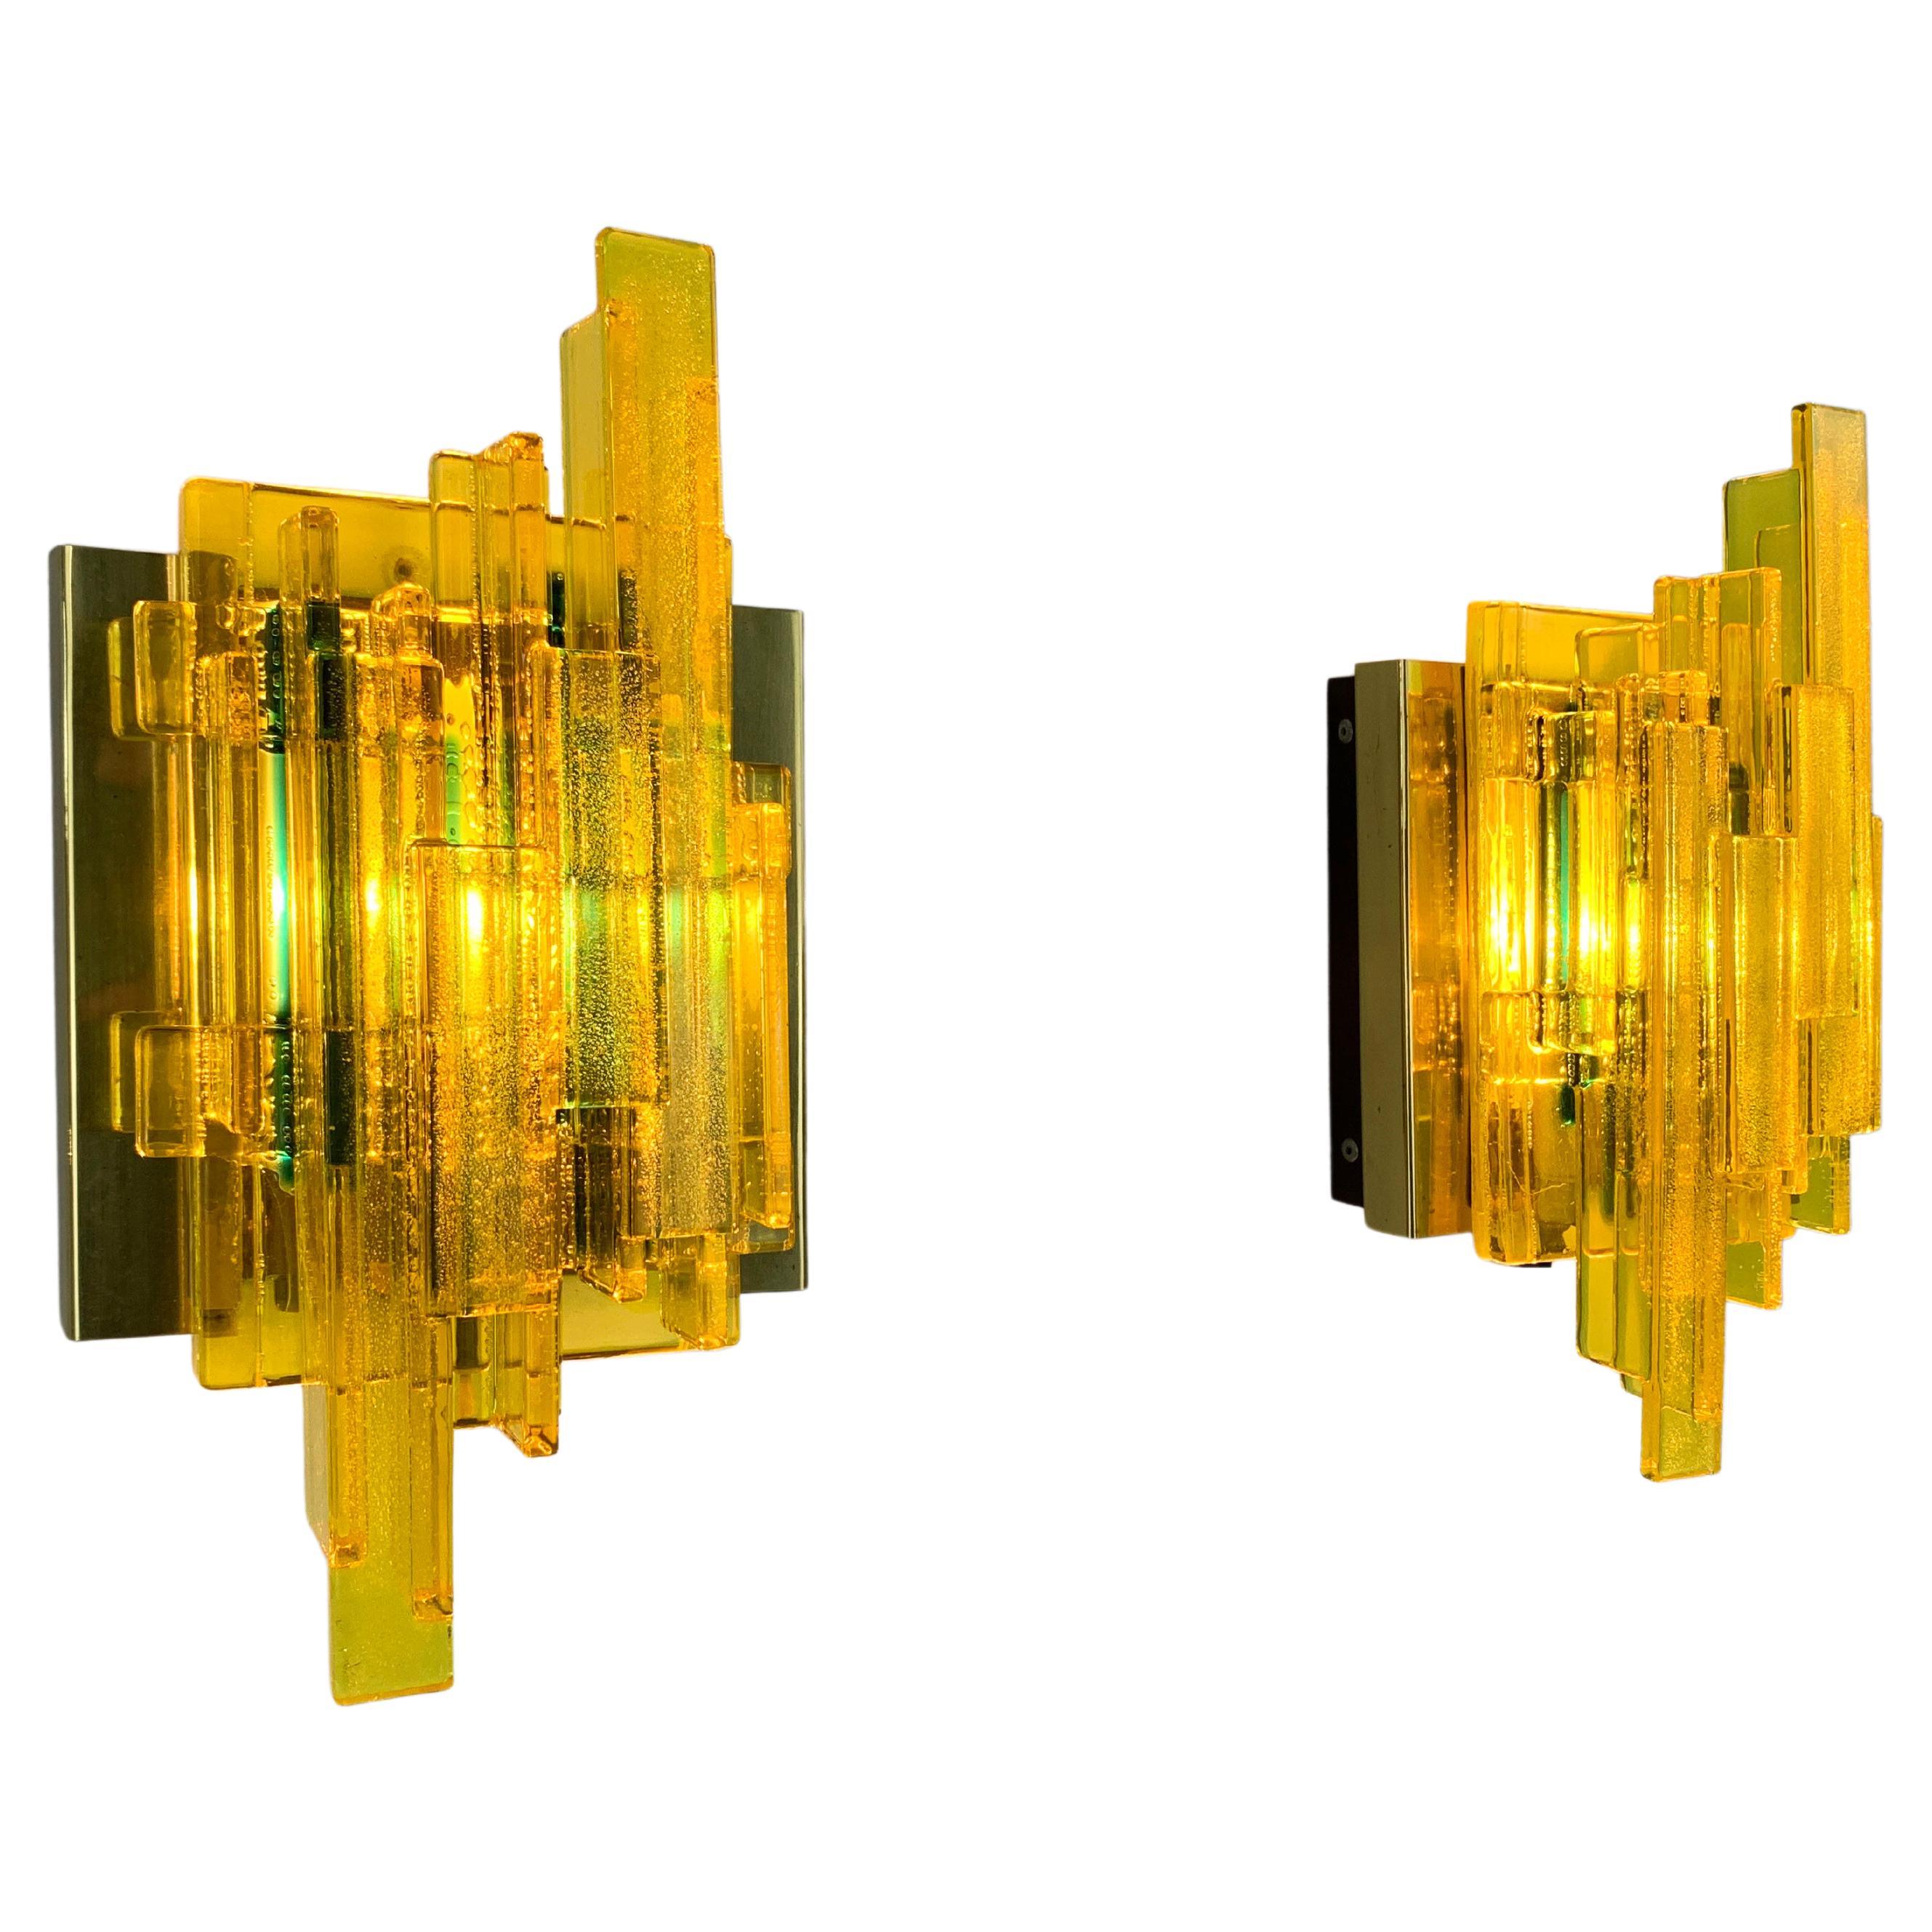 Pair of Brutalist Danish Wall Lamps by Claus Bolby for Cebo Industri, 1970s For Sale